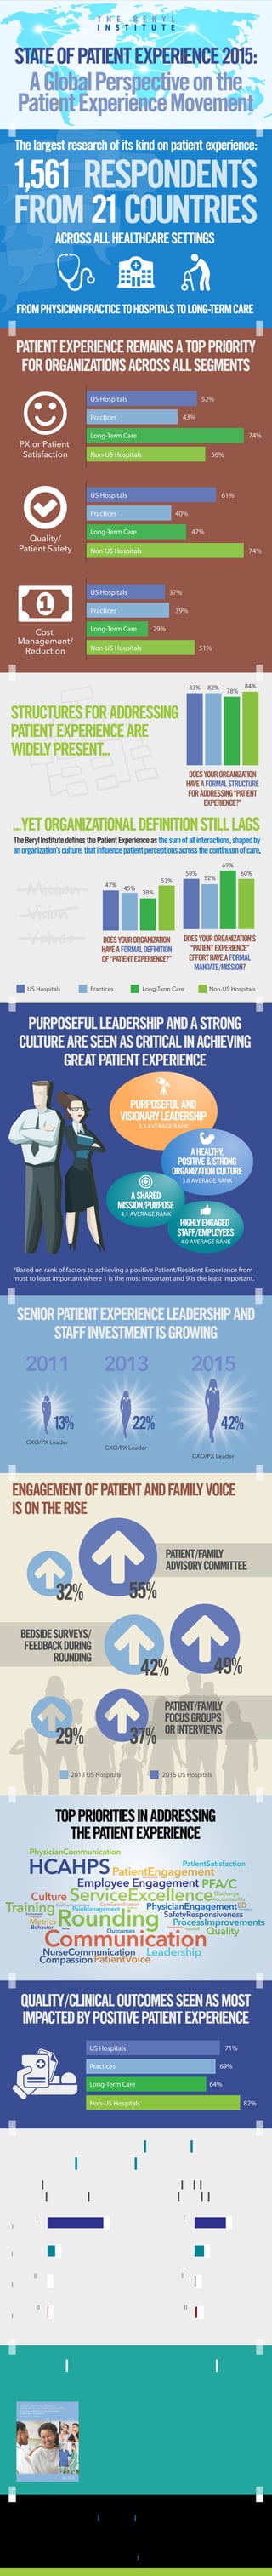 PURPOSEFUL LEADERSHIP AND A STRONG
CULTURE ARE SEEN AS CRITICAL IN ACHIEVING
GREAT PATIENT EXPERIENCE
STATE OF PATIENT EXPERIENCE 2015:
A Global Perspective on the
Patient Experience Movement
PATIENT EXPERIENCE REMAINS A TOP PRIORITY
FOR ORGANIZATIONS ACROSS ALL SEGMENTS
Non-US HospitalsLong-Term CareUS Hospitals Practices
47%
45%
53%
38%
DOESYOUR ORGANIZATION
HAVE A FORMAL DEFINITION
OF “PATIENT EXPERIENCE?”
83% 82% 84%
78%
DOESYOUR ORGANIZATION
HAVE A FORMAL STRUCTURE
FOR ADDRESSING “PATIENT
EXPERIENCE?”
58%
52%
60%
69%
DOESYOUR ORGANIZATION’S
“PATIENT EXPERIENCE”
EFFORT HAVE A FORMAL
MANDATE/MISSION?
SENIOR PATIENT EXPERIENCE LEADERSHIP AND
STAFF INVESTMENT IS GROWING
20132011
ENGAGEMENT OF PATIENT AND FAMILYVOICE
IS ON THE RISE
2013 US Hospitals 2015 US Hospitals
SOURCE:
A Report onThe Beryl Institute Benchmarking Study, State of
Patient Experience 2015: A Global Perspective on the Patient
Experience Movement, Jason A. Wolf, Ph.D., President
Improving the Patient Experience
   
www.theberylinstitute.org
LEADING FORWARD: A CALL TO ACTION
What is your organization’s commitment to providing the best in experience?
43%Practices
74%Long-Term Care
56%Non-US Hospitals
52%US Hospitals
40%Practices
47%Long-Term Care
74%Non-US Hospitals
61%US Hospitals
PX or Patient
Satisfaction
Quality/
Patient Safety
39%Practices
29%Long-Term Care
51%Non-US Hospitals
37%US Hospitals
Cost
Management/
Reduction



...YET ORGANIZATIONAL DEFINITION STILL LAGS
The Beryl Institute defines the Patient Experience as the sum of all interactions, shaped by
an organization’s culture, that influence patient perceptions across the continuum of care.
STRUCTURES FOR ADDRESSING
PATIENT EXPERIENCE ARE
WIDELYPRESENT...
Mission
Vision
Values
2015
22%13% 42%
CXO/PX Leader
CXO/PX Leader
CXO/PX Leader
PATIENT/FAMILY
FOCUS GROUPS
OR INTERVIEWS
PATIENT/FAMILY
ADVISORYCOMMITTEE
BEDSIDE SURVEYS/
FEEDBACK DURING
ROUNDING
32% 55%
42% 49%
37%29%
The largest research of its kind on patient experience:
1,561 RESPONDENTS
FROM 21 COUNTRIES
FROM PHYSICIAN PRACTICE TO HOSPITALS TO LONG-TERM CARE
TOP PRIORITIES IN ADDRESSING
THE PATIENT EXPERIENCE
QUALITY/CLINICAL OUTCOMES SEEN AS MOST
IMPACTED BYPOSITIVE PATIENT EXPERIENCE
THE CONSUMER IS SPEAKING:
PATIENT EXPERIENCE MATTERS
HCAHPS
PhysicianCommunication
PatientEngagement
PatientSatisfaction
Medications
Employee Engagement PFA/C
Culture ServiceExcellenceDischarge
Accountability
Access
TrainingBestPracticesFacilities CareCoordination
Staffing
Recognition
PhysicianEngagementEDPopulation
SafetyResponsiveness
ProcessImprovementsTransparancy
Cleanliness
Handoff
Outcomes Quality
CommunicationLeadershipNurseCommunication
CompassionPatientVoice
Metrics
Behavior Noise
Environment
Rounding
PainManagement
ACROSS ALL HEALTHCARE SETTINGS
HIGHLYENGAGED
STAFF/EMPLOYEES
PURPOSEFUL AND
VISIONARYLEADERSHIP
3.3 AVERAGE RANK
A HEALTHY,
POSITIVE & STRONG
ORGANIZATION CULTURE
3.8 AVERAGE RANK
4.0 AVERAGE RANK
A SHARED
MISSION/PURPOSE
4.1 AVERAGE RANK
69%Practices
64%Long-Term Care
82%Non-US Hospitals
71%US Hospitals
Somewhat
Important
12%
Not at All
Important 1%
87%
Extremely
Important
Minimally
Important 0%
*Based on rank of factors to achieving a positive Patient/Resident Experience from
most to least important where 1 is the most important and 9 is the least important.
Somewhat
Significant
28%
Not at All
Significant 4%
67%
Extremely
Significant
Minimally
Significant 1%
IMPORTANCE OF
PATIENT EXPERIENCE
SIGNIFICANCE
IN DECISIONS
 